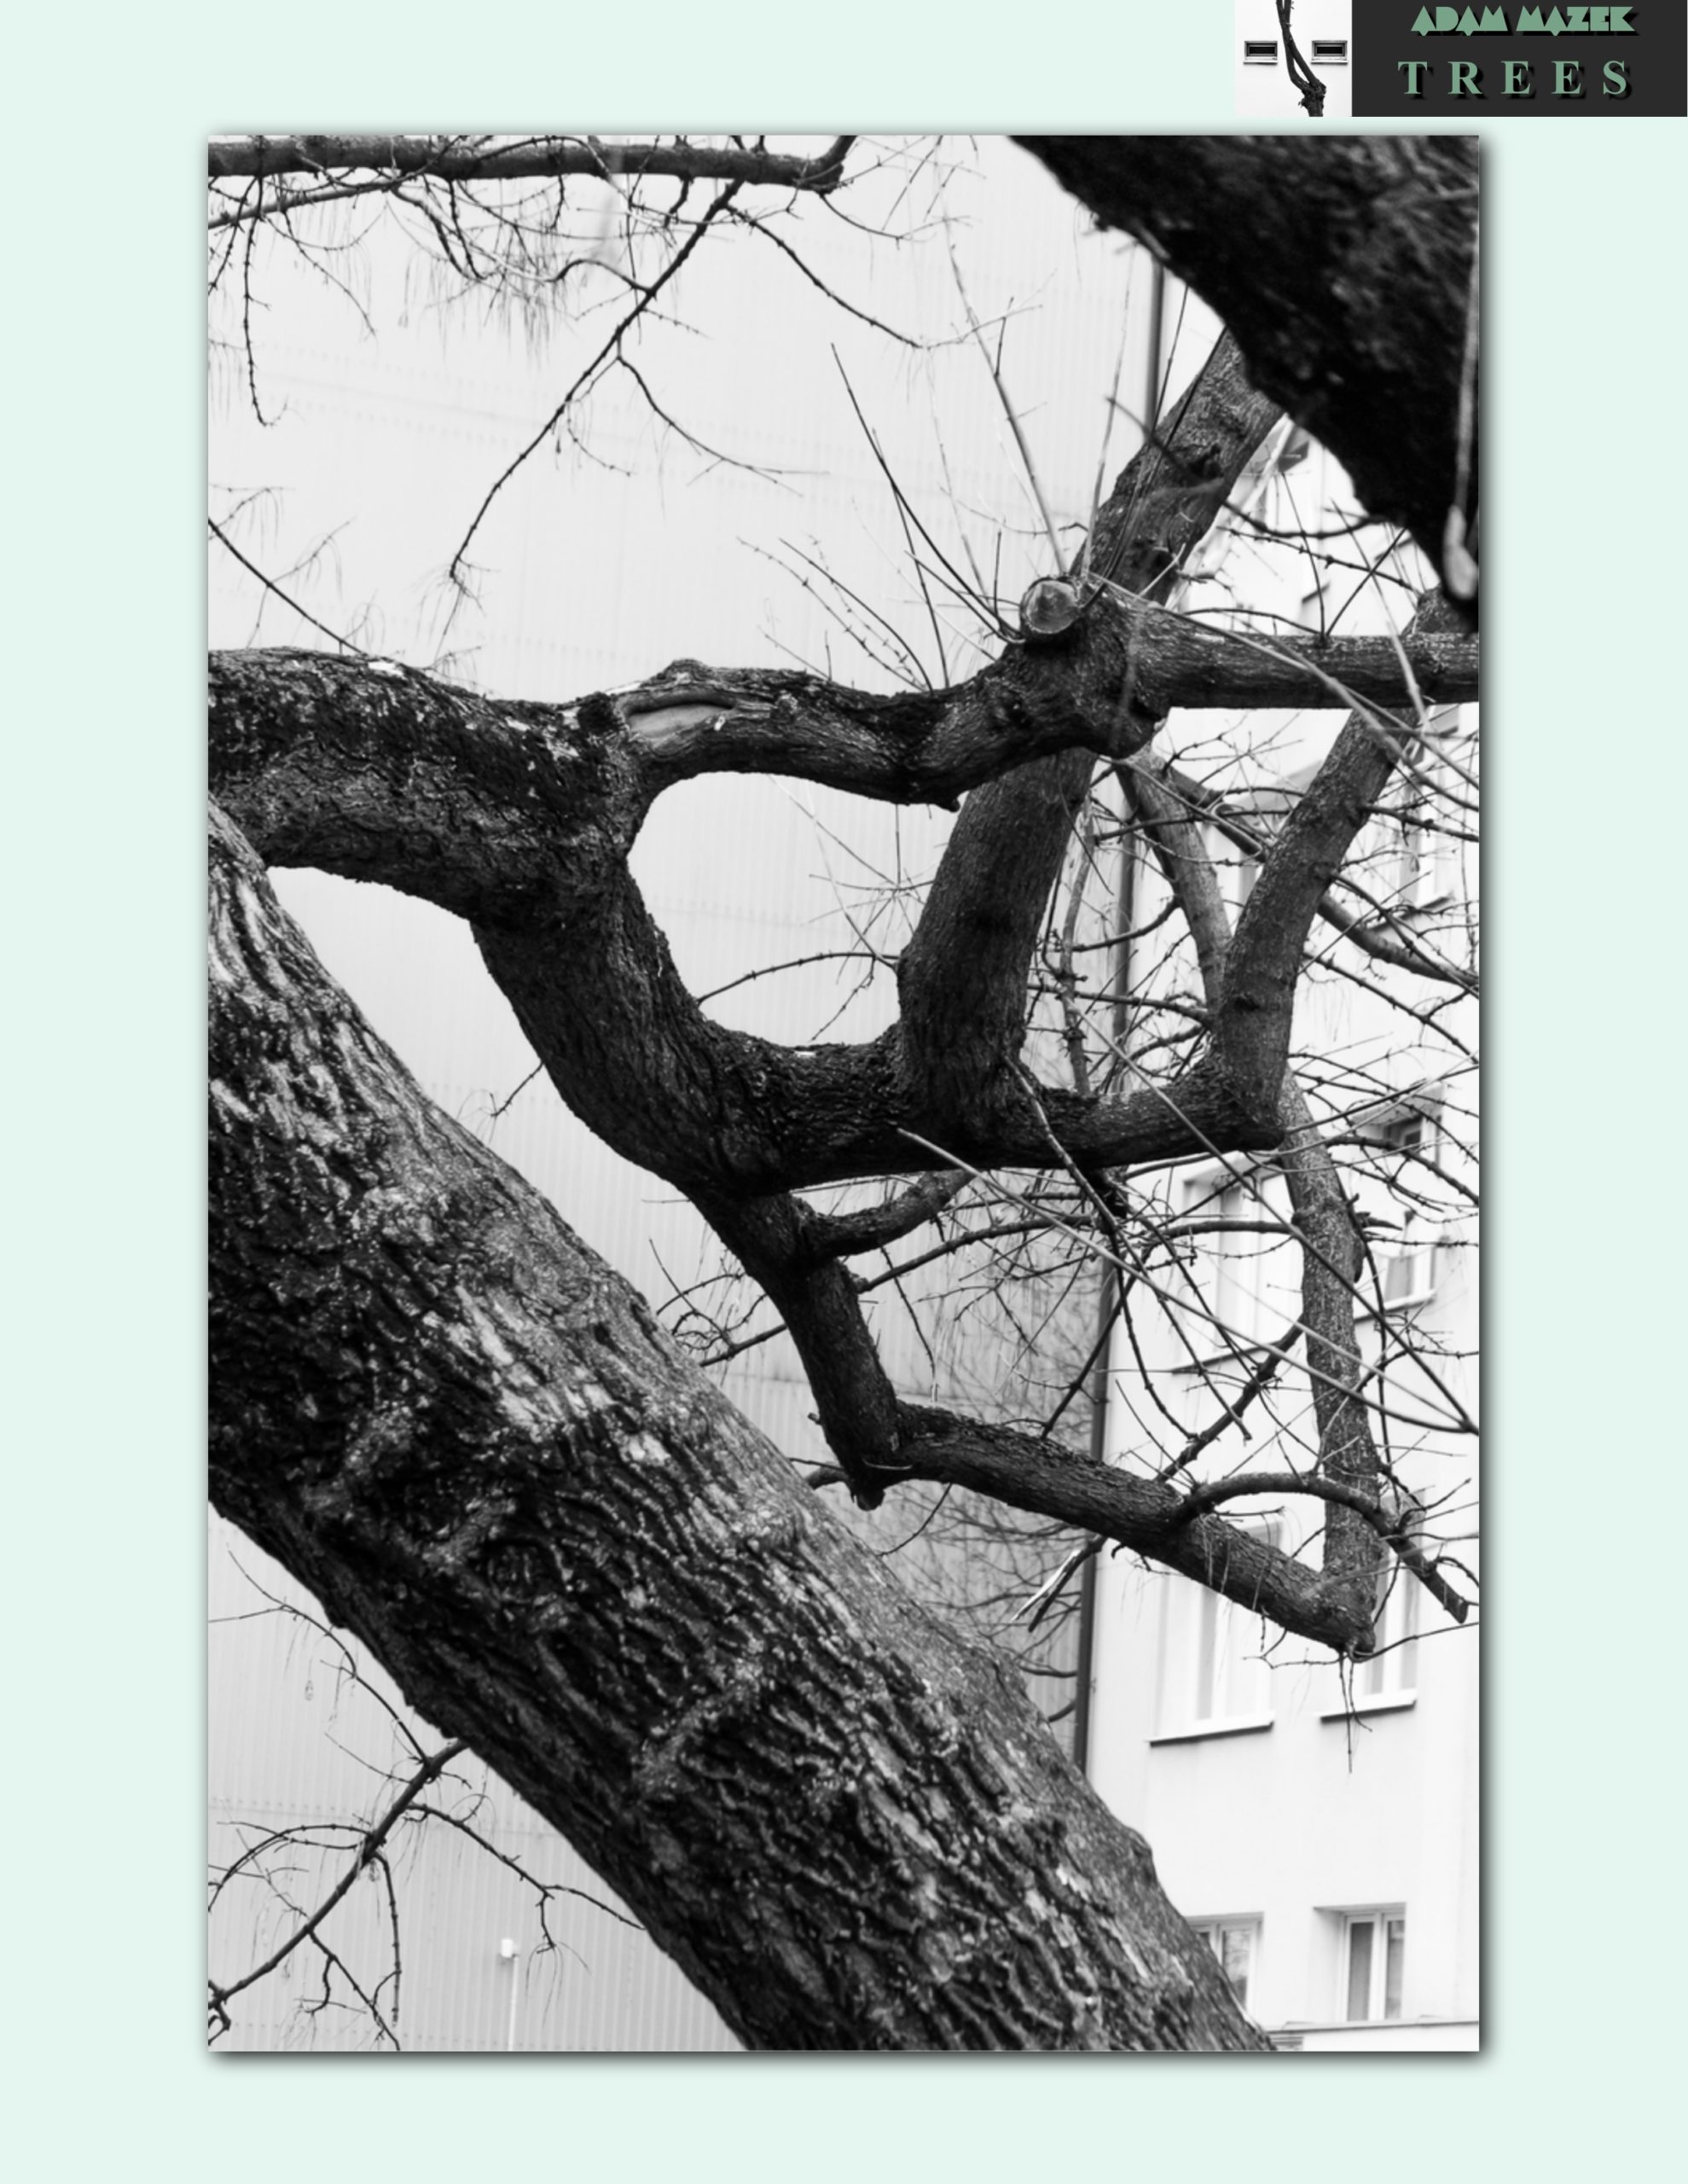 Adam Mazek Photography 2019. Post: "Trees, part I." Mini e-book. Cover of the first part. Featured image.